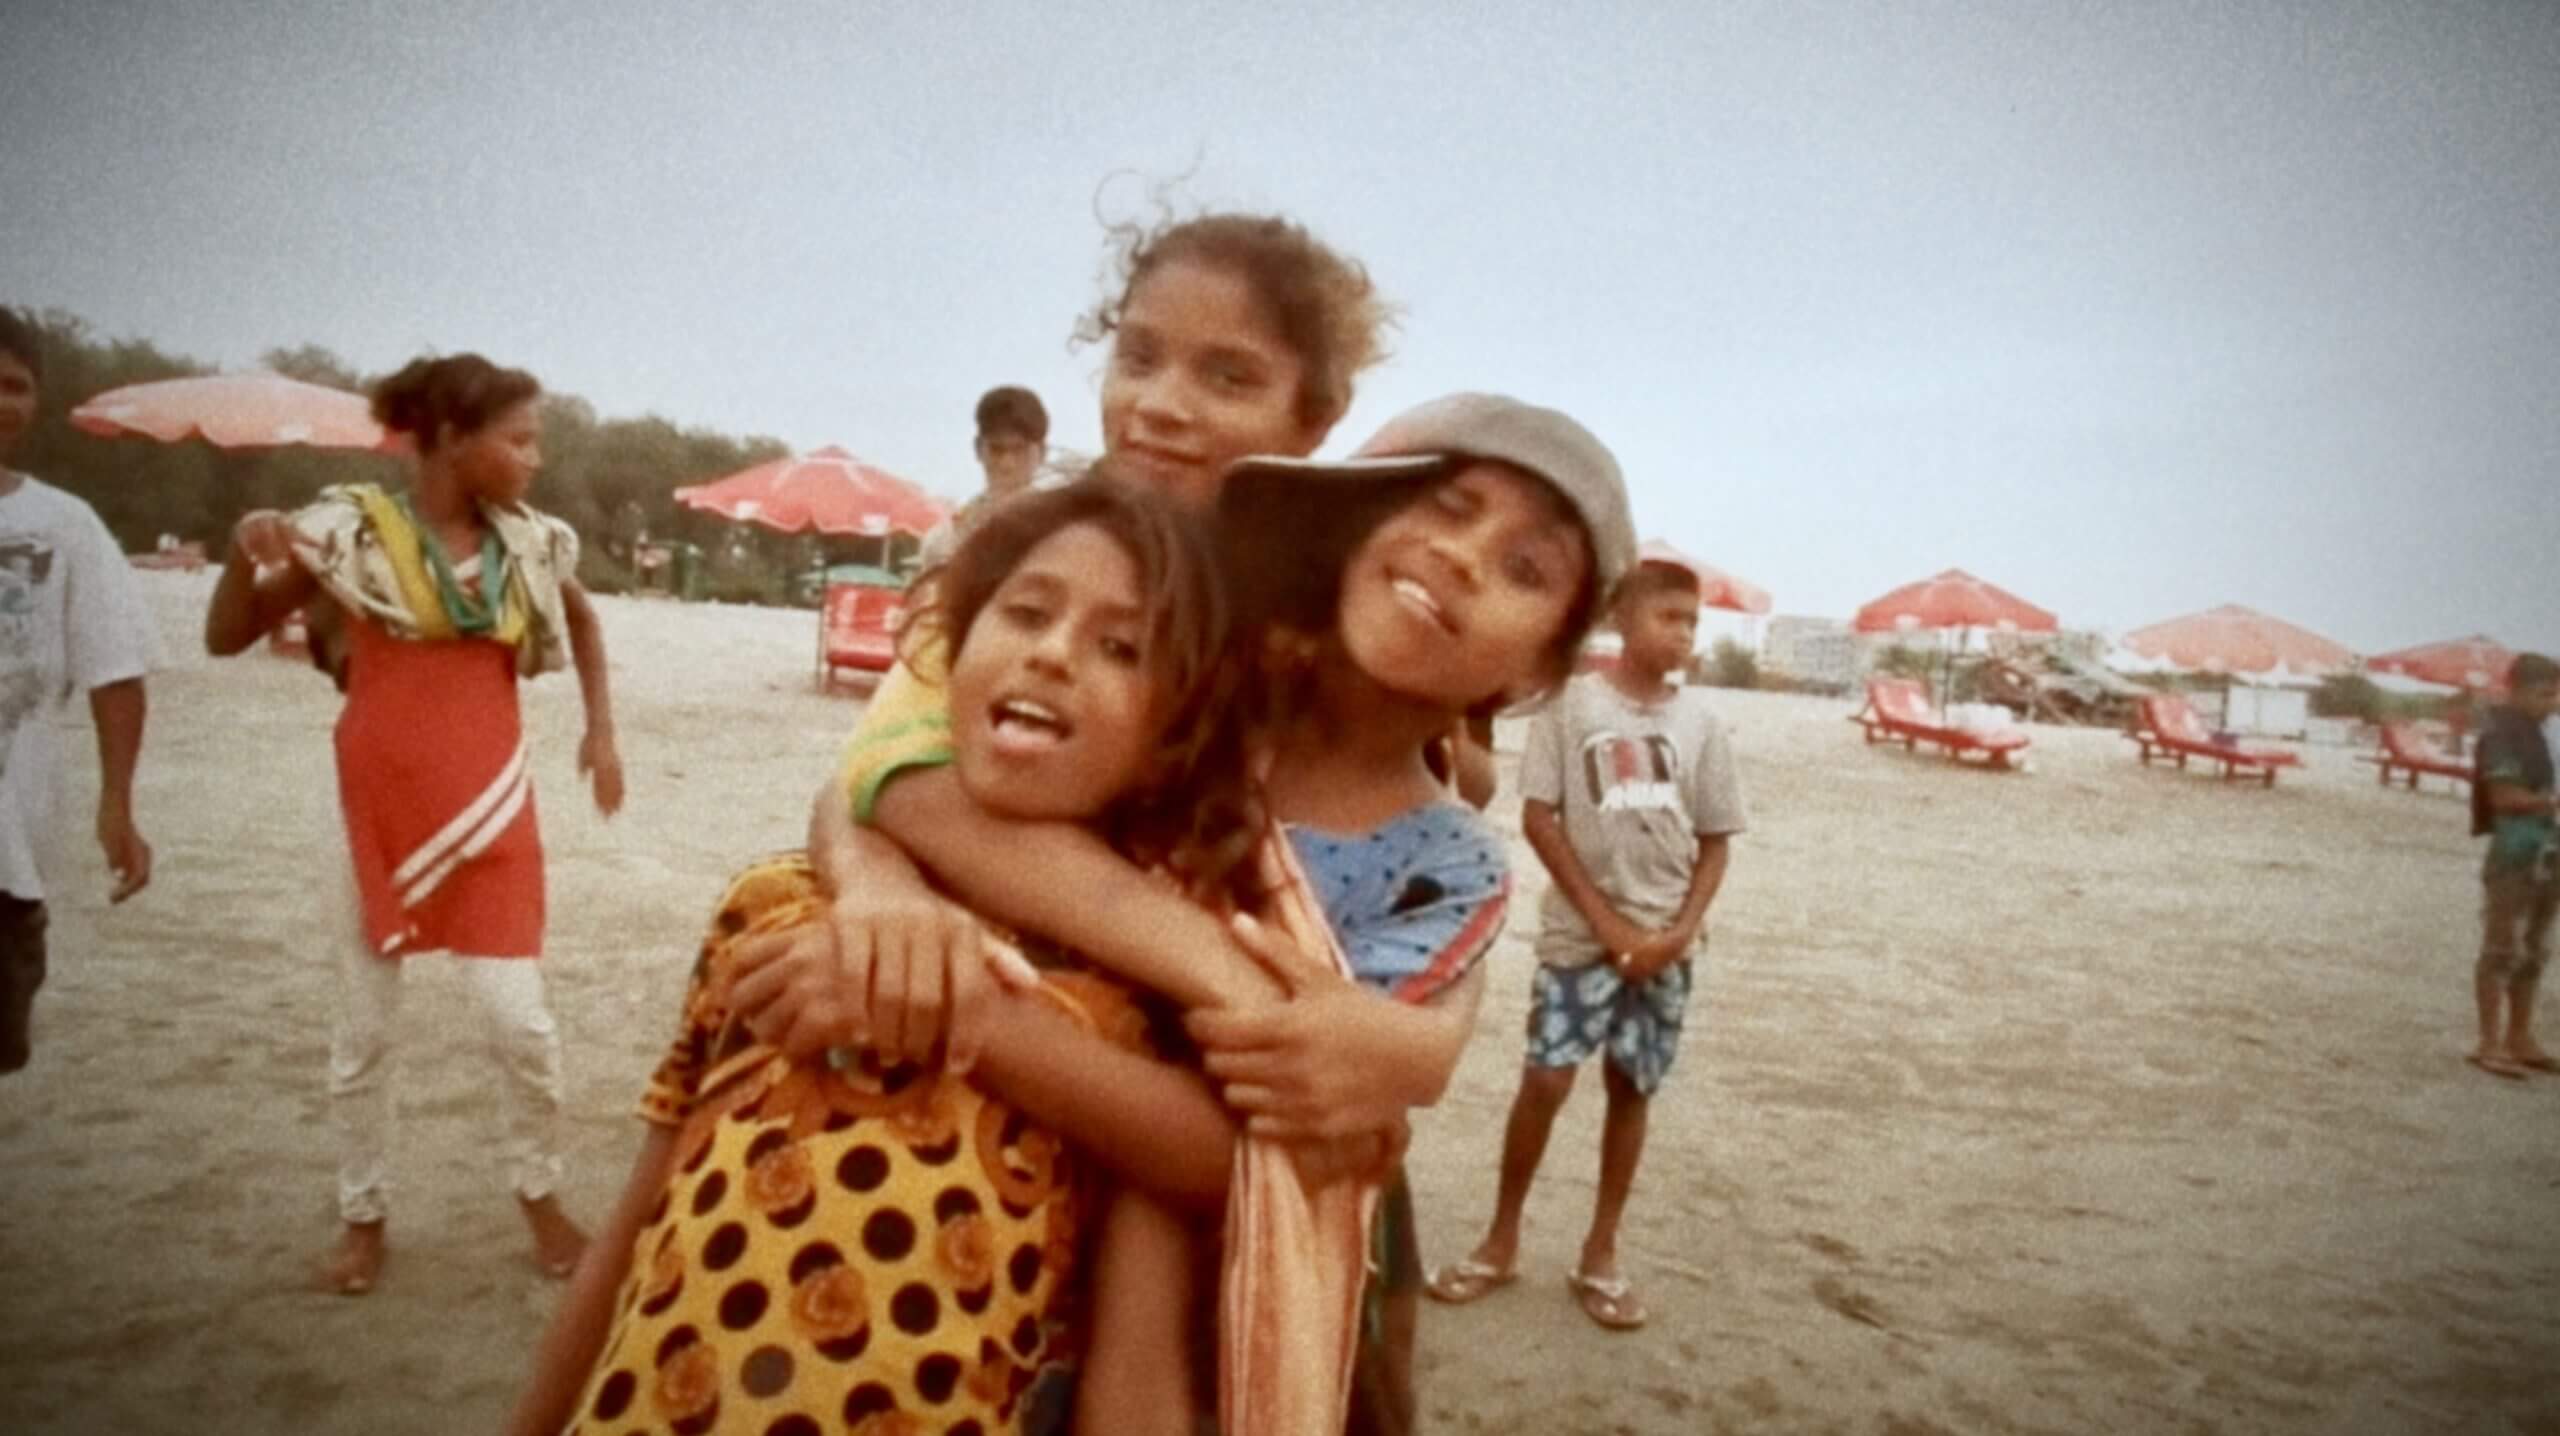 Still from Bangla Surf Girls. Three young girls on the beach are hugging in front of the camera.